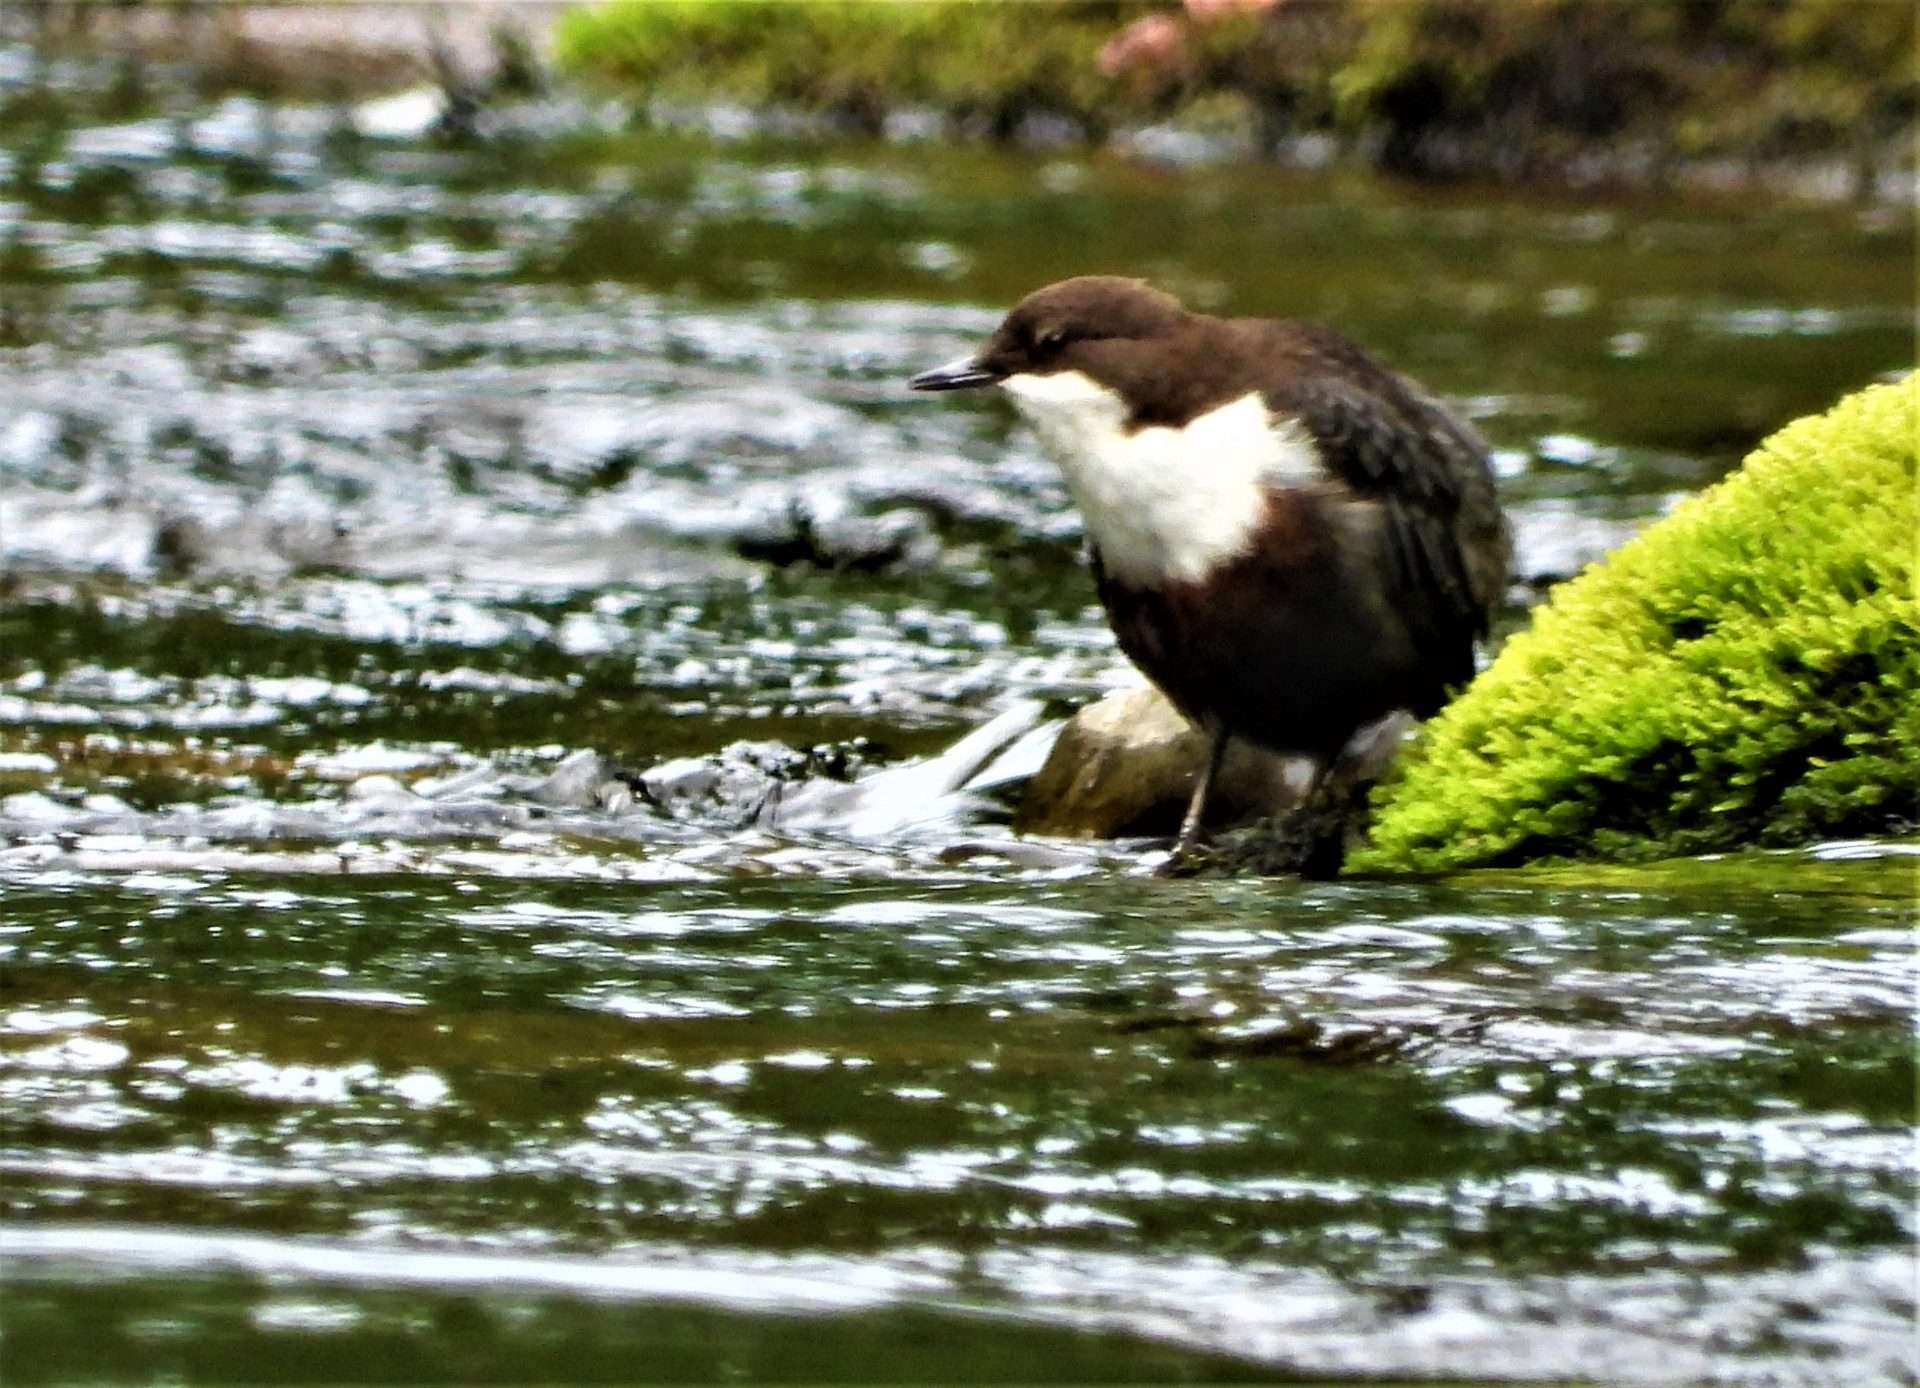 Dipper by Kenneth Bradley at Spitchwick